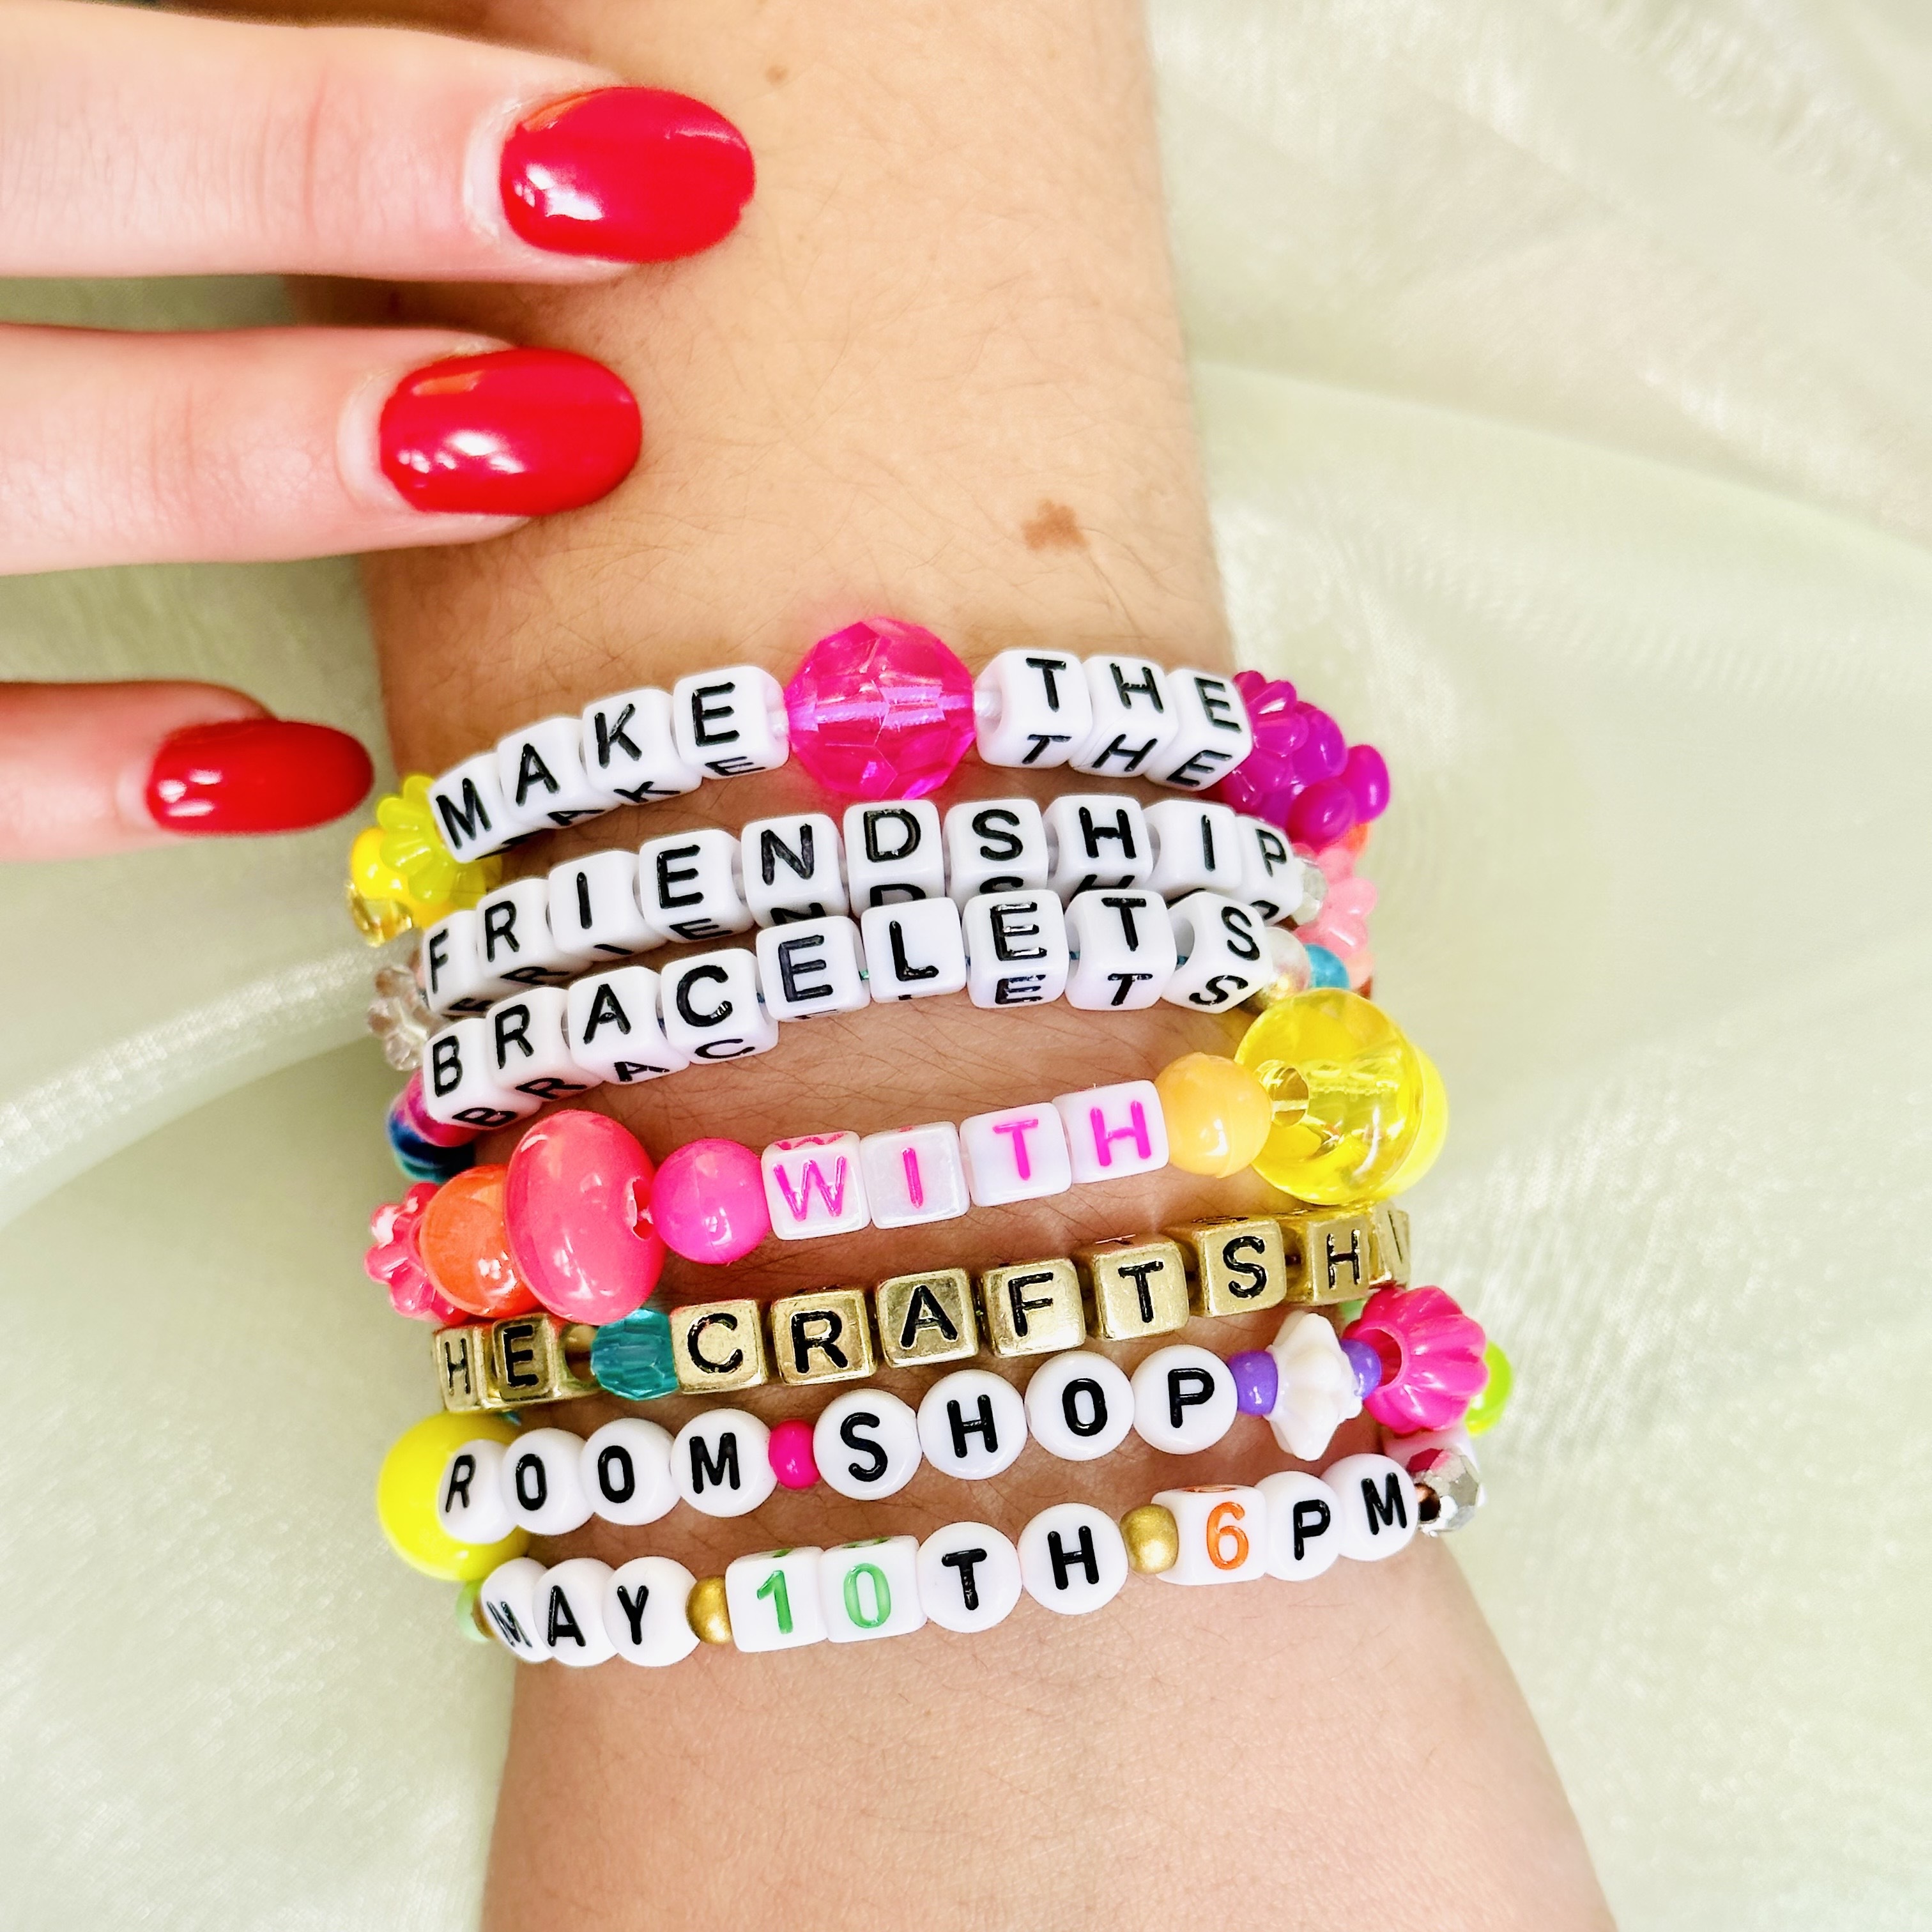 7 Things To Make Friendship Bracelets For Taylor Swift Concerts